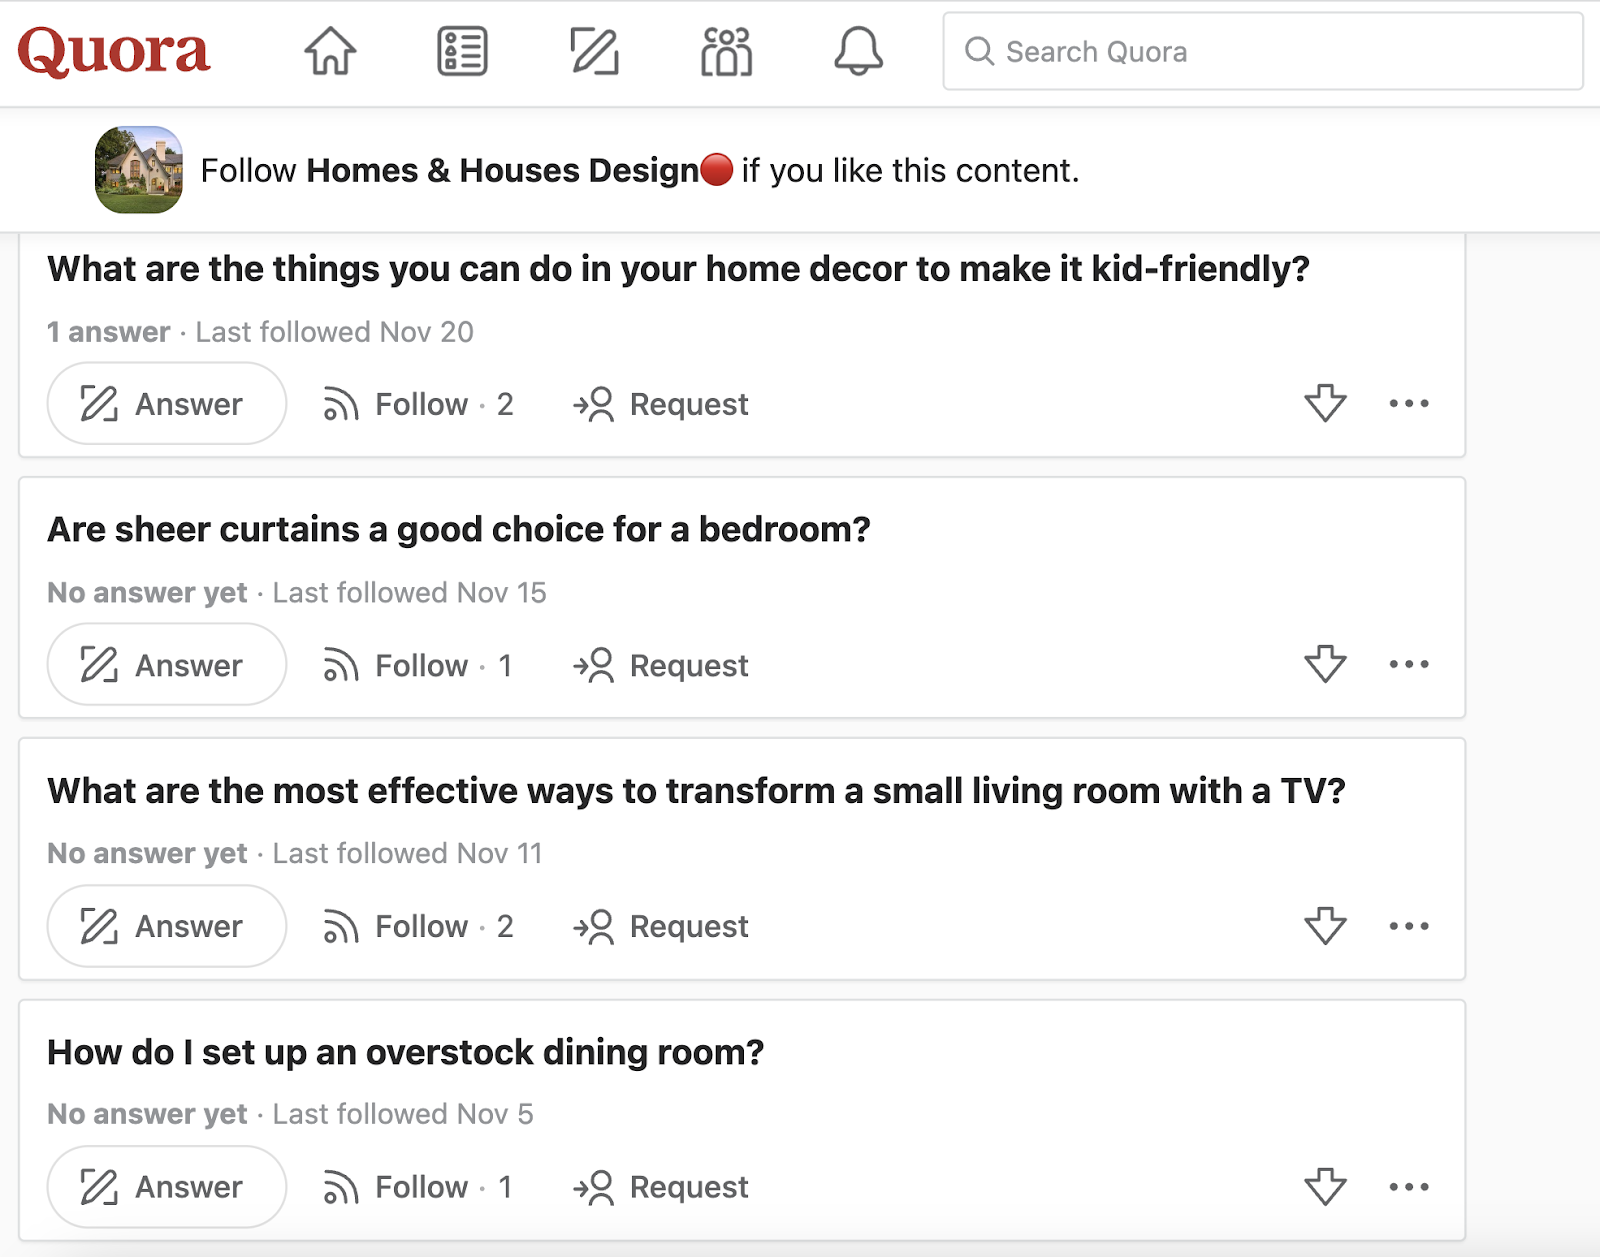 Questions page for "Homes & Houses Design" space on Quora